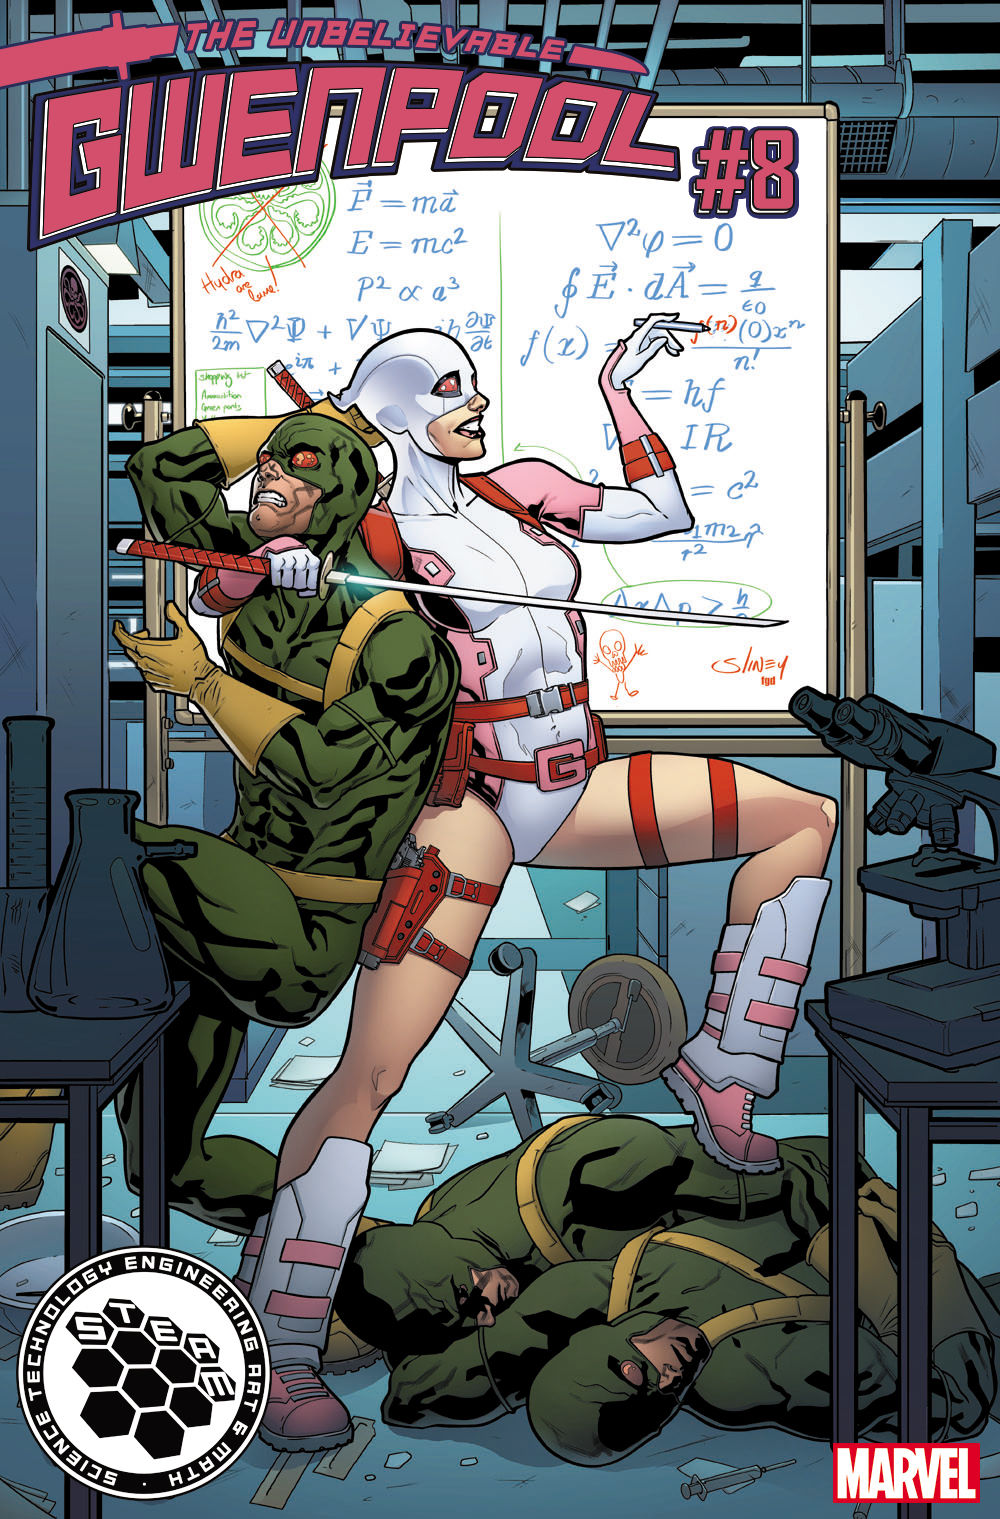 Marvel’s New Variant Comic Covers Want To Get Kids Into STEM (And The Arts, Too)